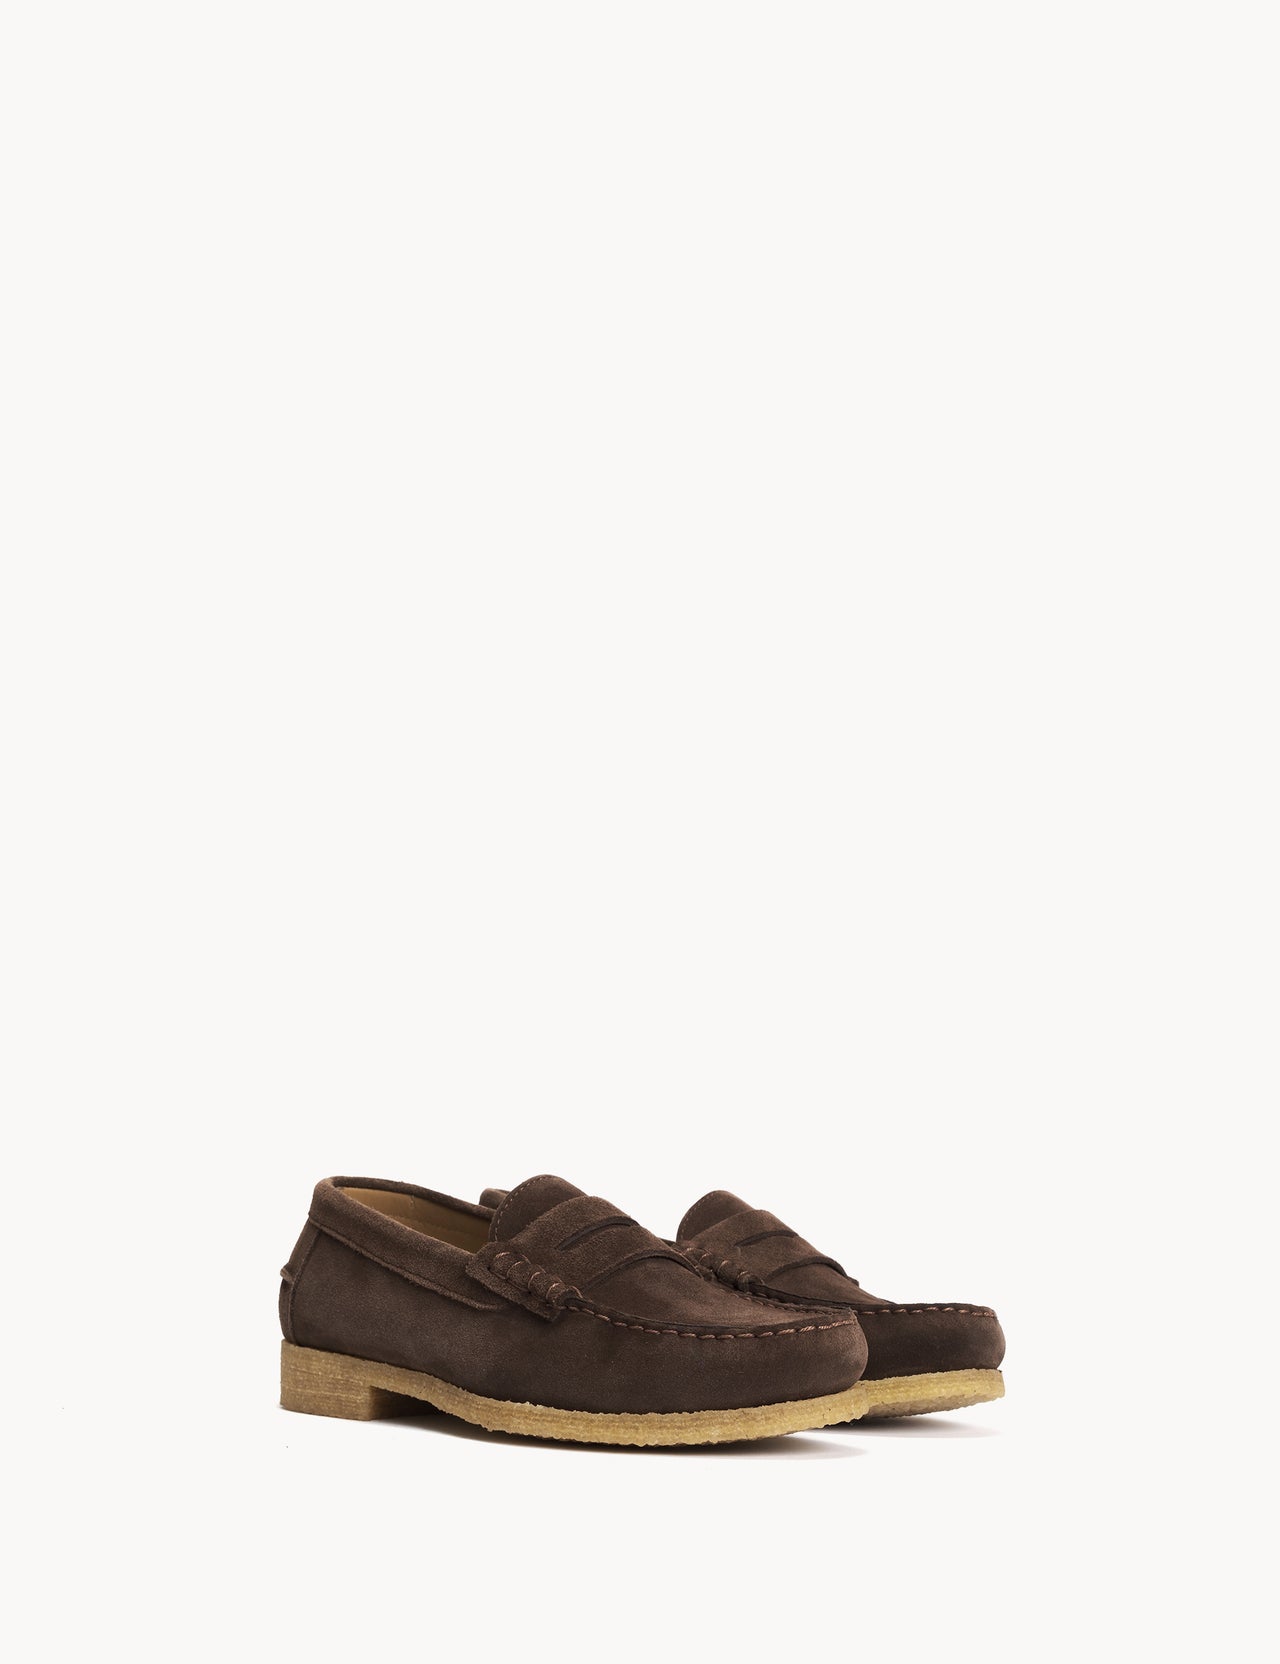 Moccasin Penny Loafer In Sigaro Calf Suede With A Crepe Sole